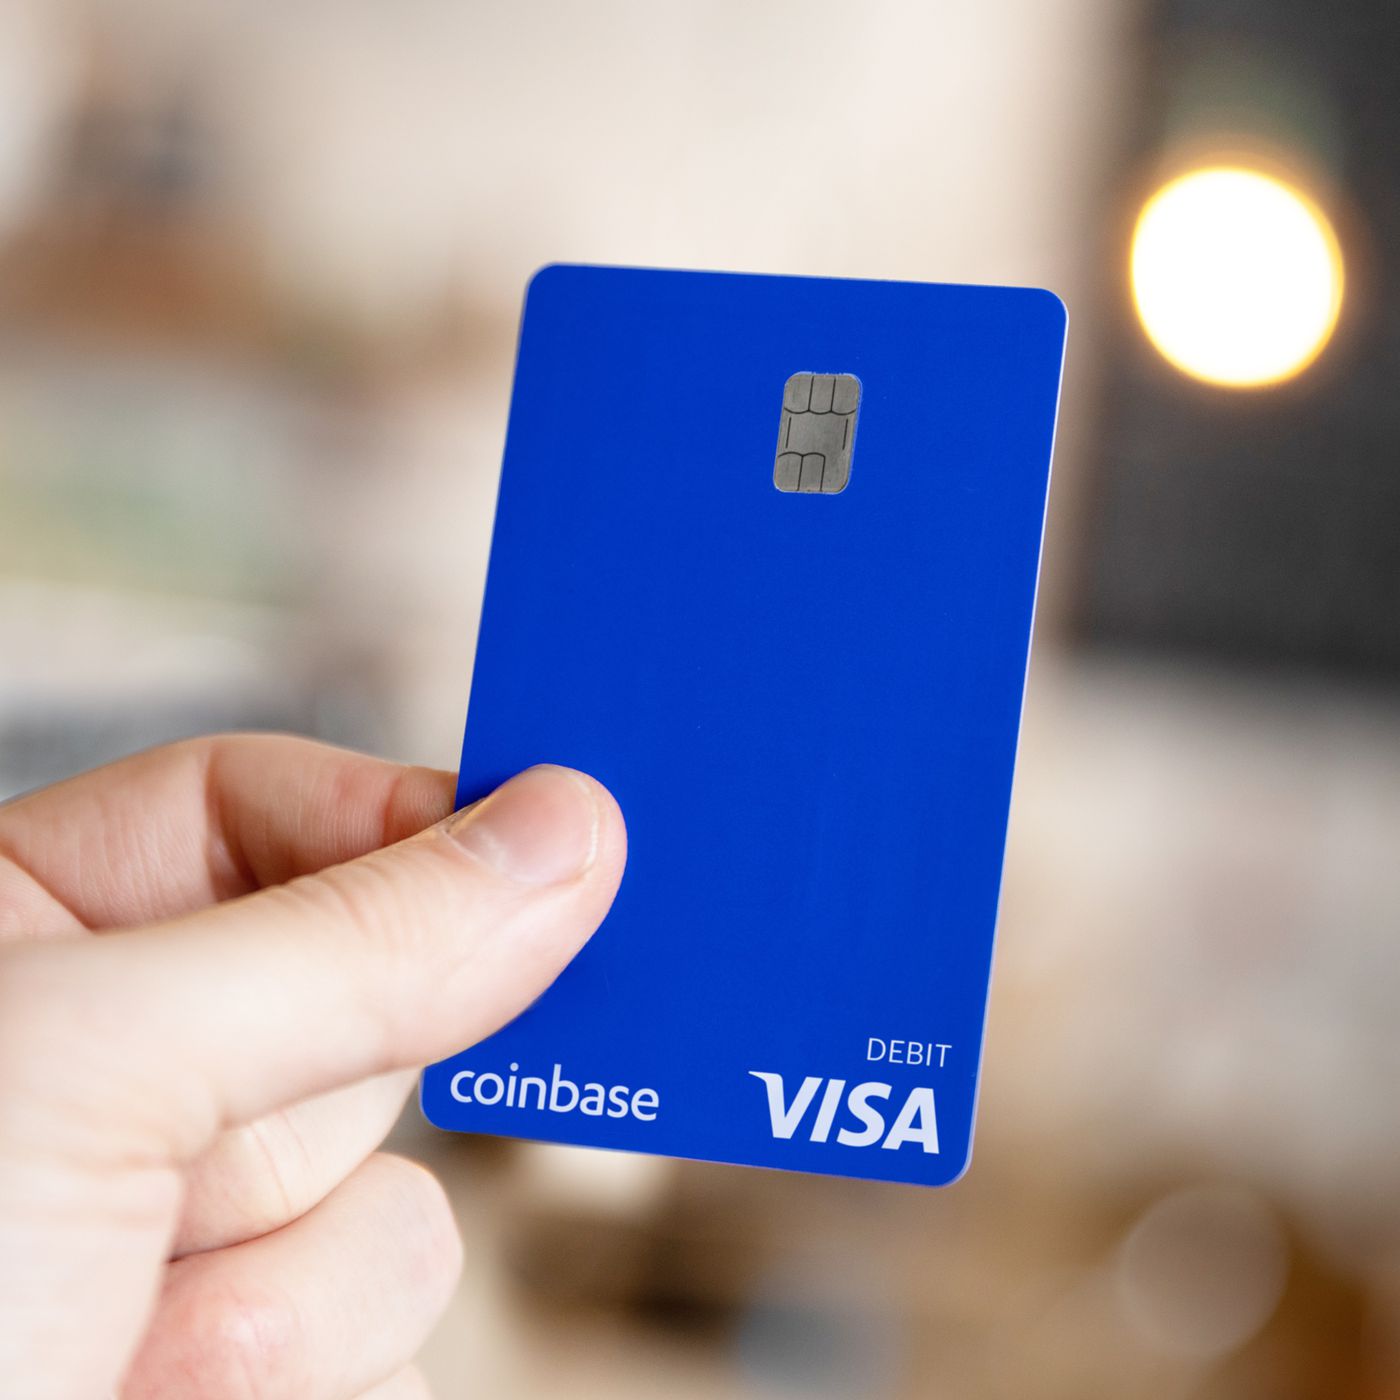 Blockchain start-up rolls out Asia’s first cryptocurrency Visa debit card to take on credit cards